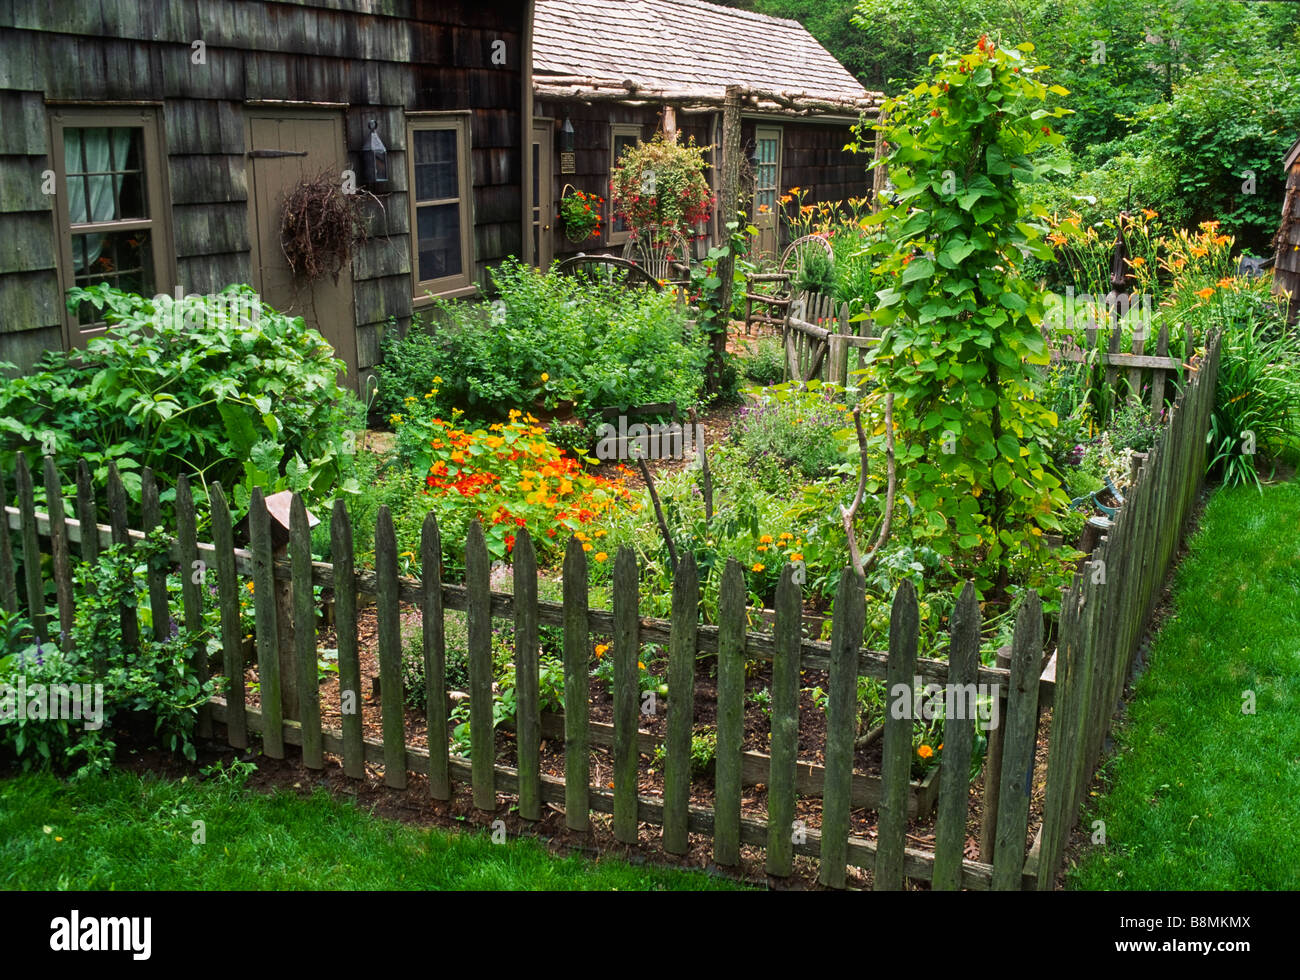 This Colonial-style dooryard herb and vegetable garden features historically correct plants and a grapevine wreath on the door. Stock Photo